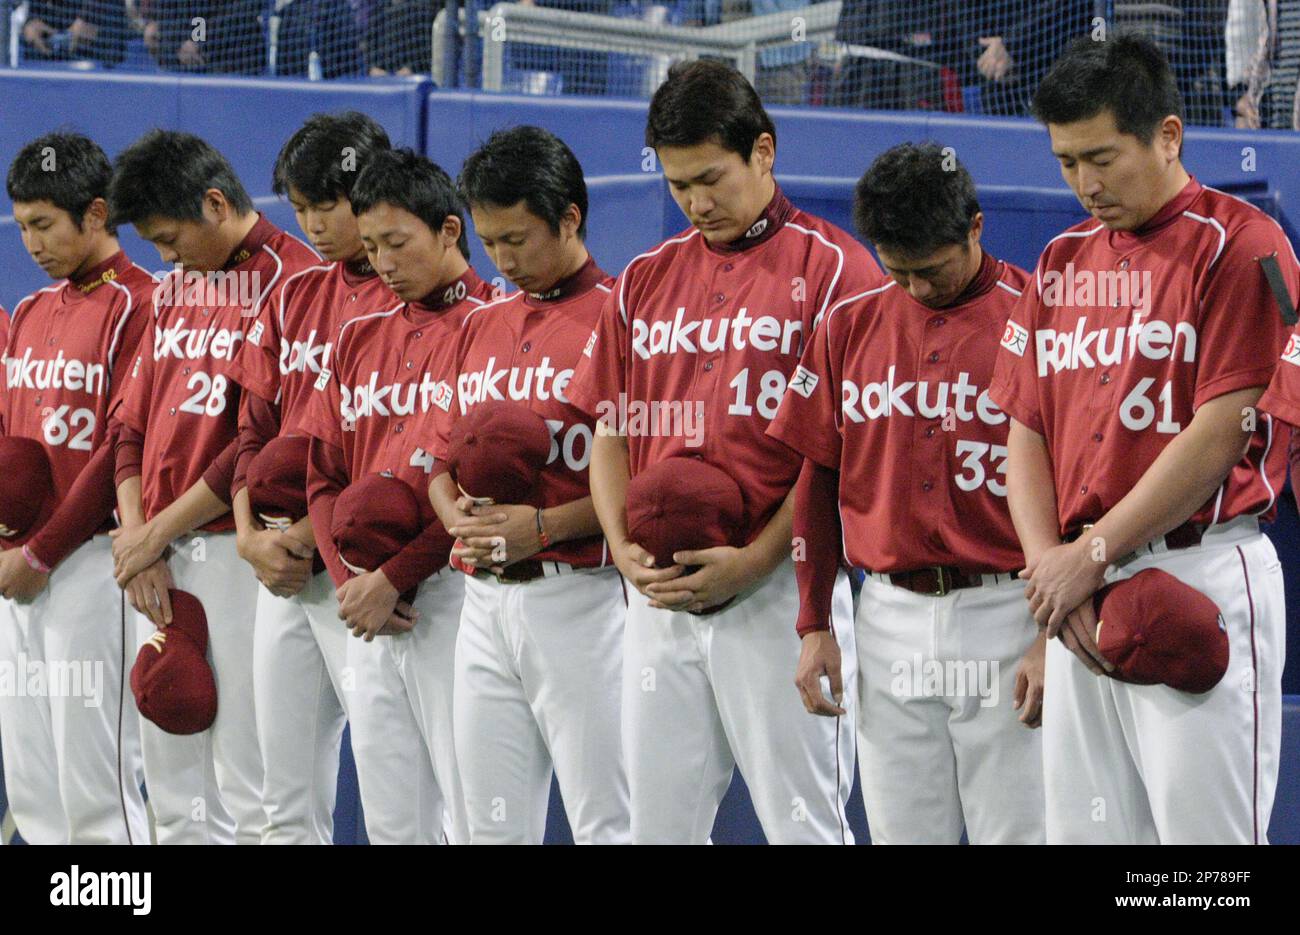 Players of the Tohoku Rakuten Golden Eagles based in Sendai observe a moment of silence for victims of the March 11 earthquake and tsunami before their baseball exhibition game against the Chunichi